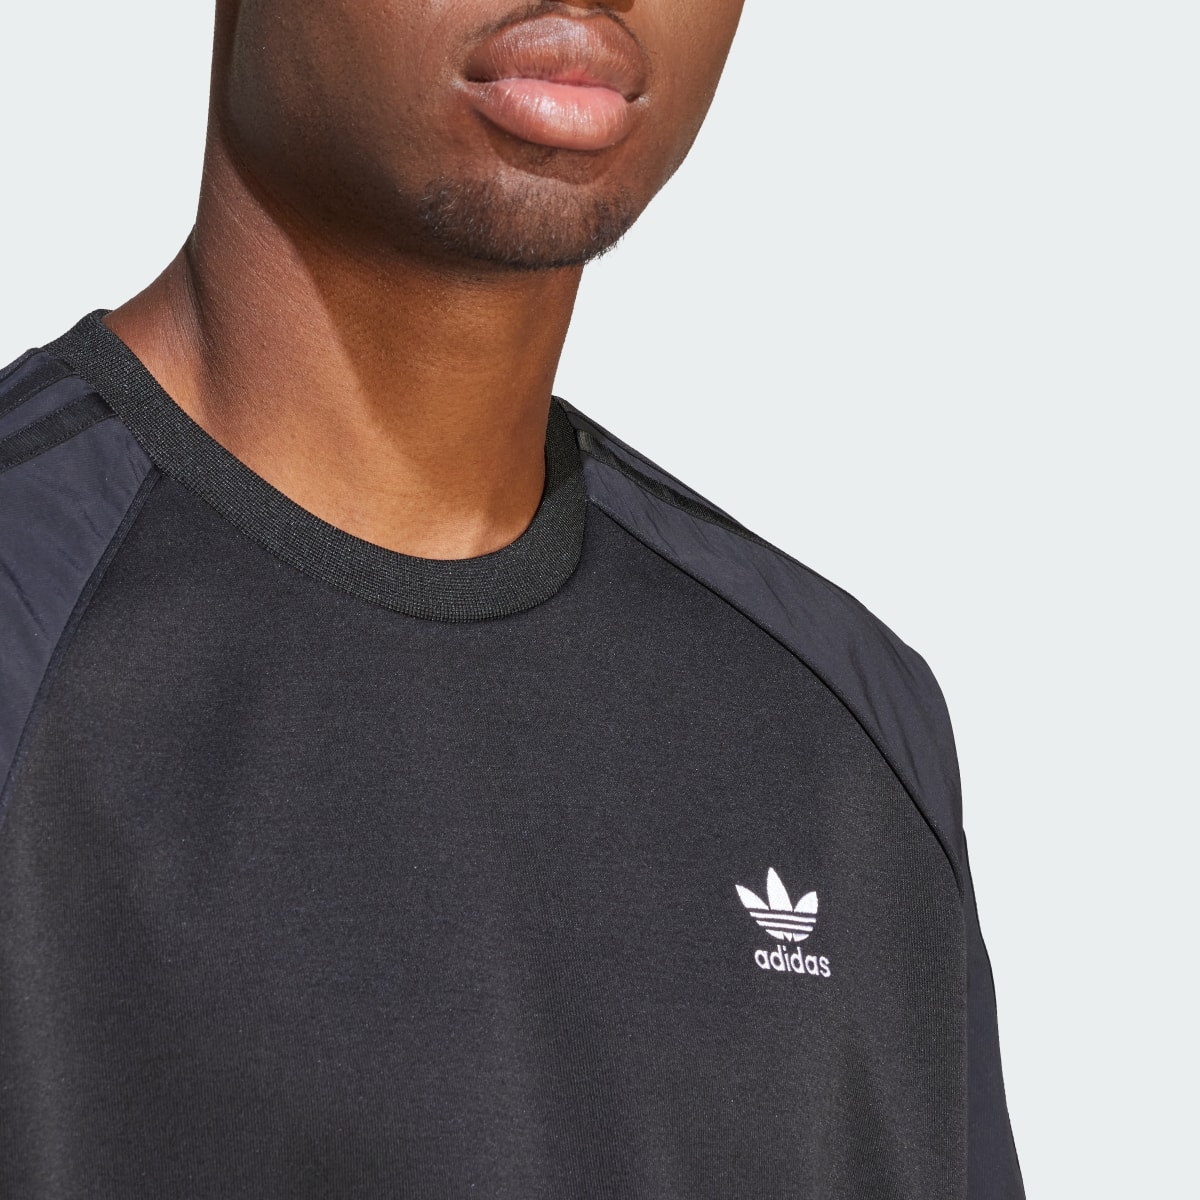 Adidas T-shirt adicolor Re-Pro SST Material Mix. 6